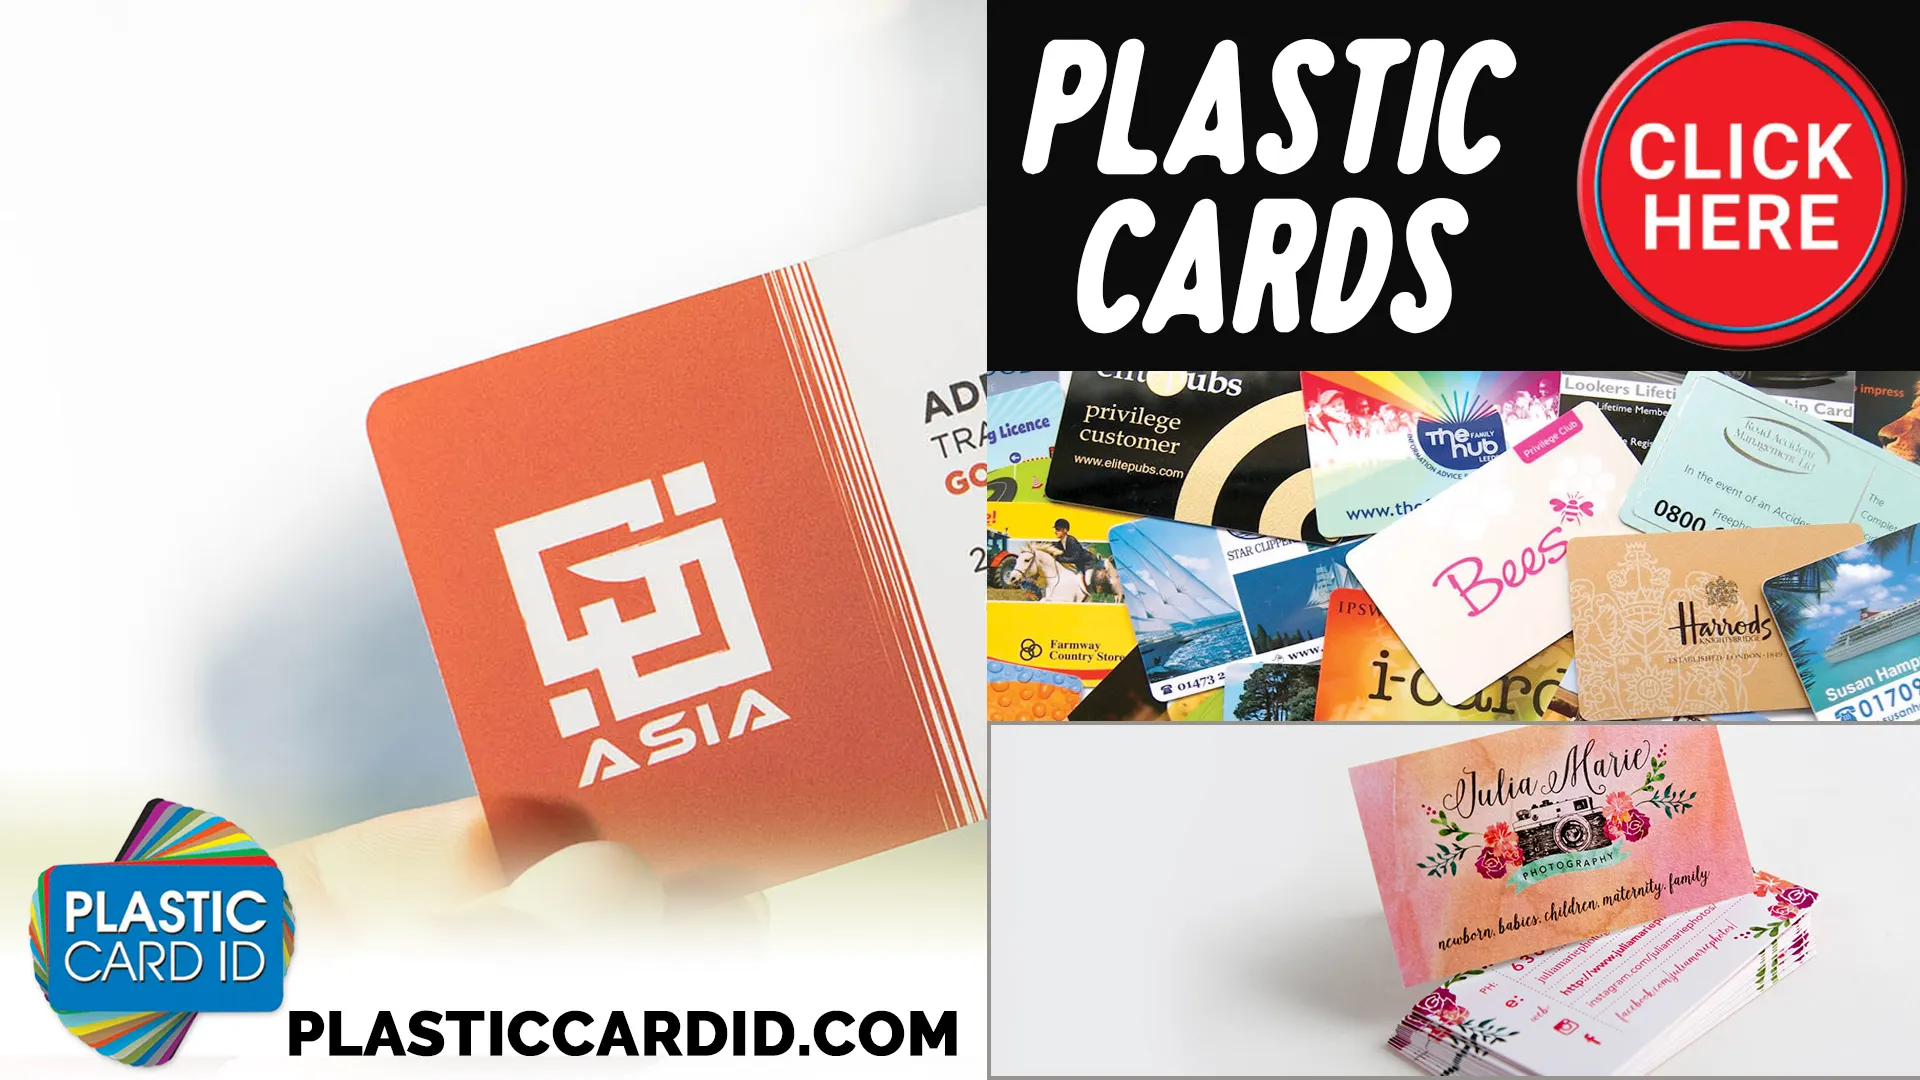 Plastic Card ID
's Smart Chip Plastic Cards Enhance Security